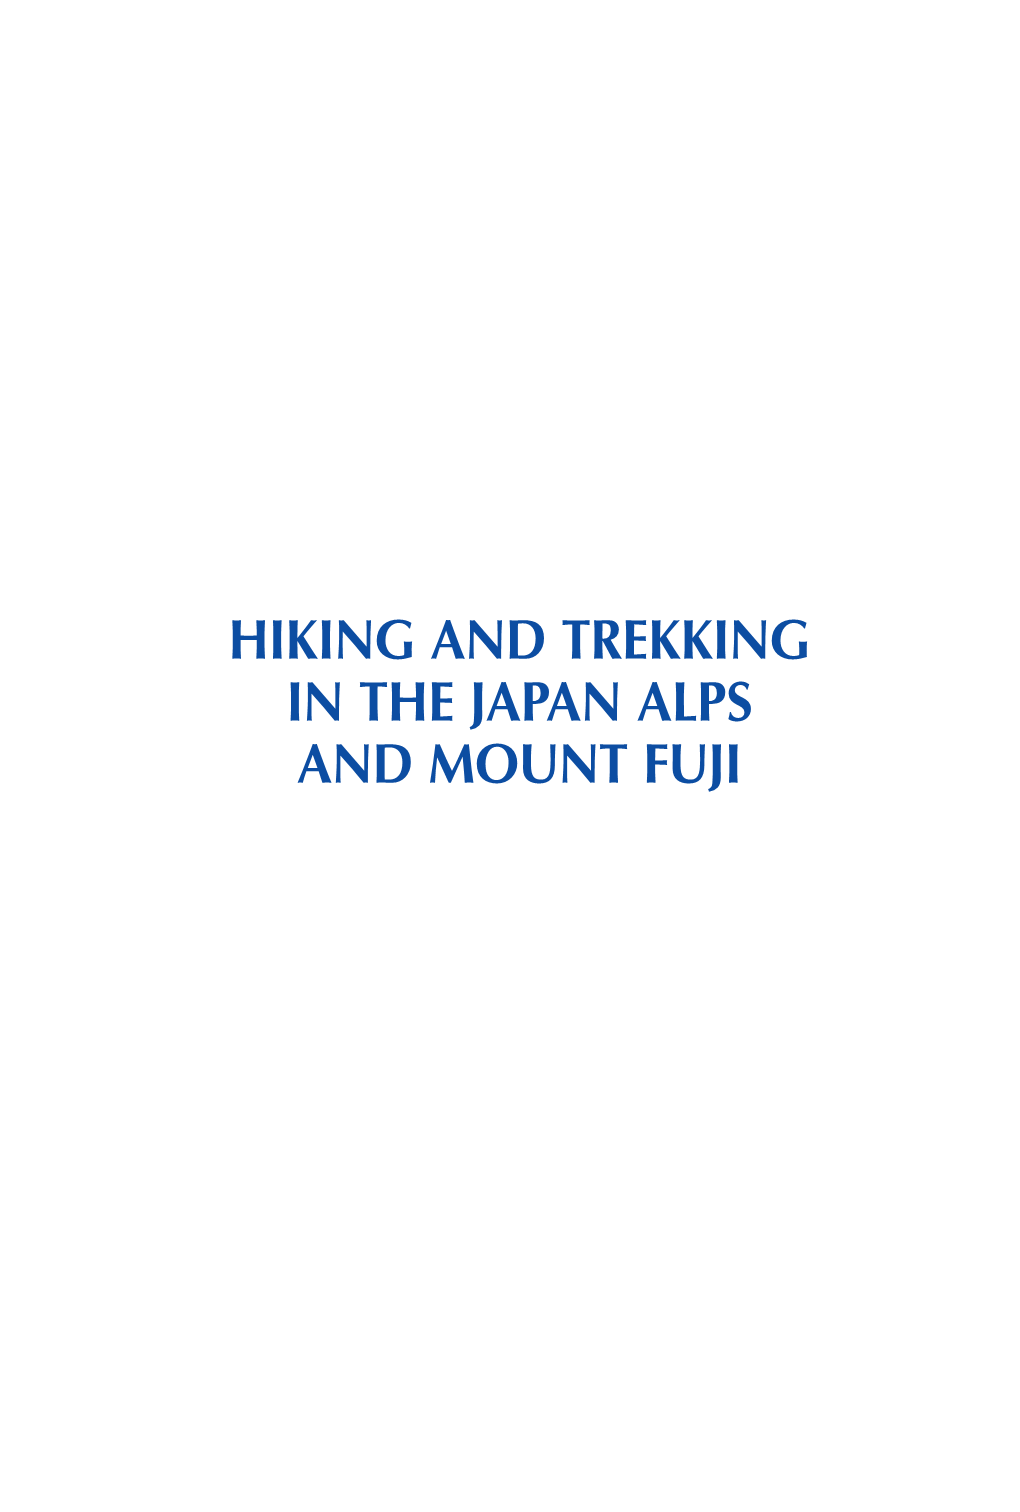 HIKING and TREKKING in the JAPAN ALPS and MOUNT FUJI About the Authors Tom Fay Is the Lead Author of Hiking and Trekking in the Japan Alps and Mount Fuji